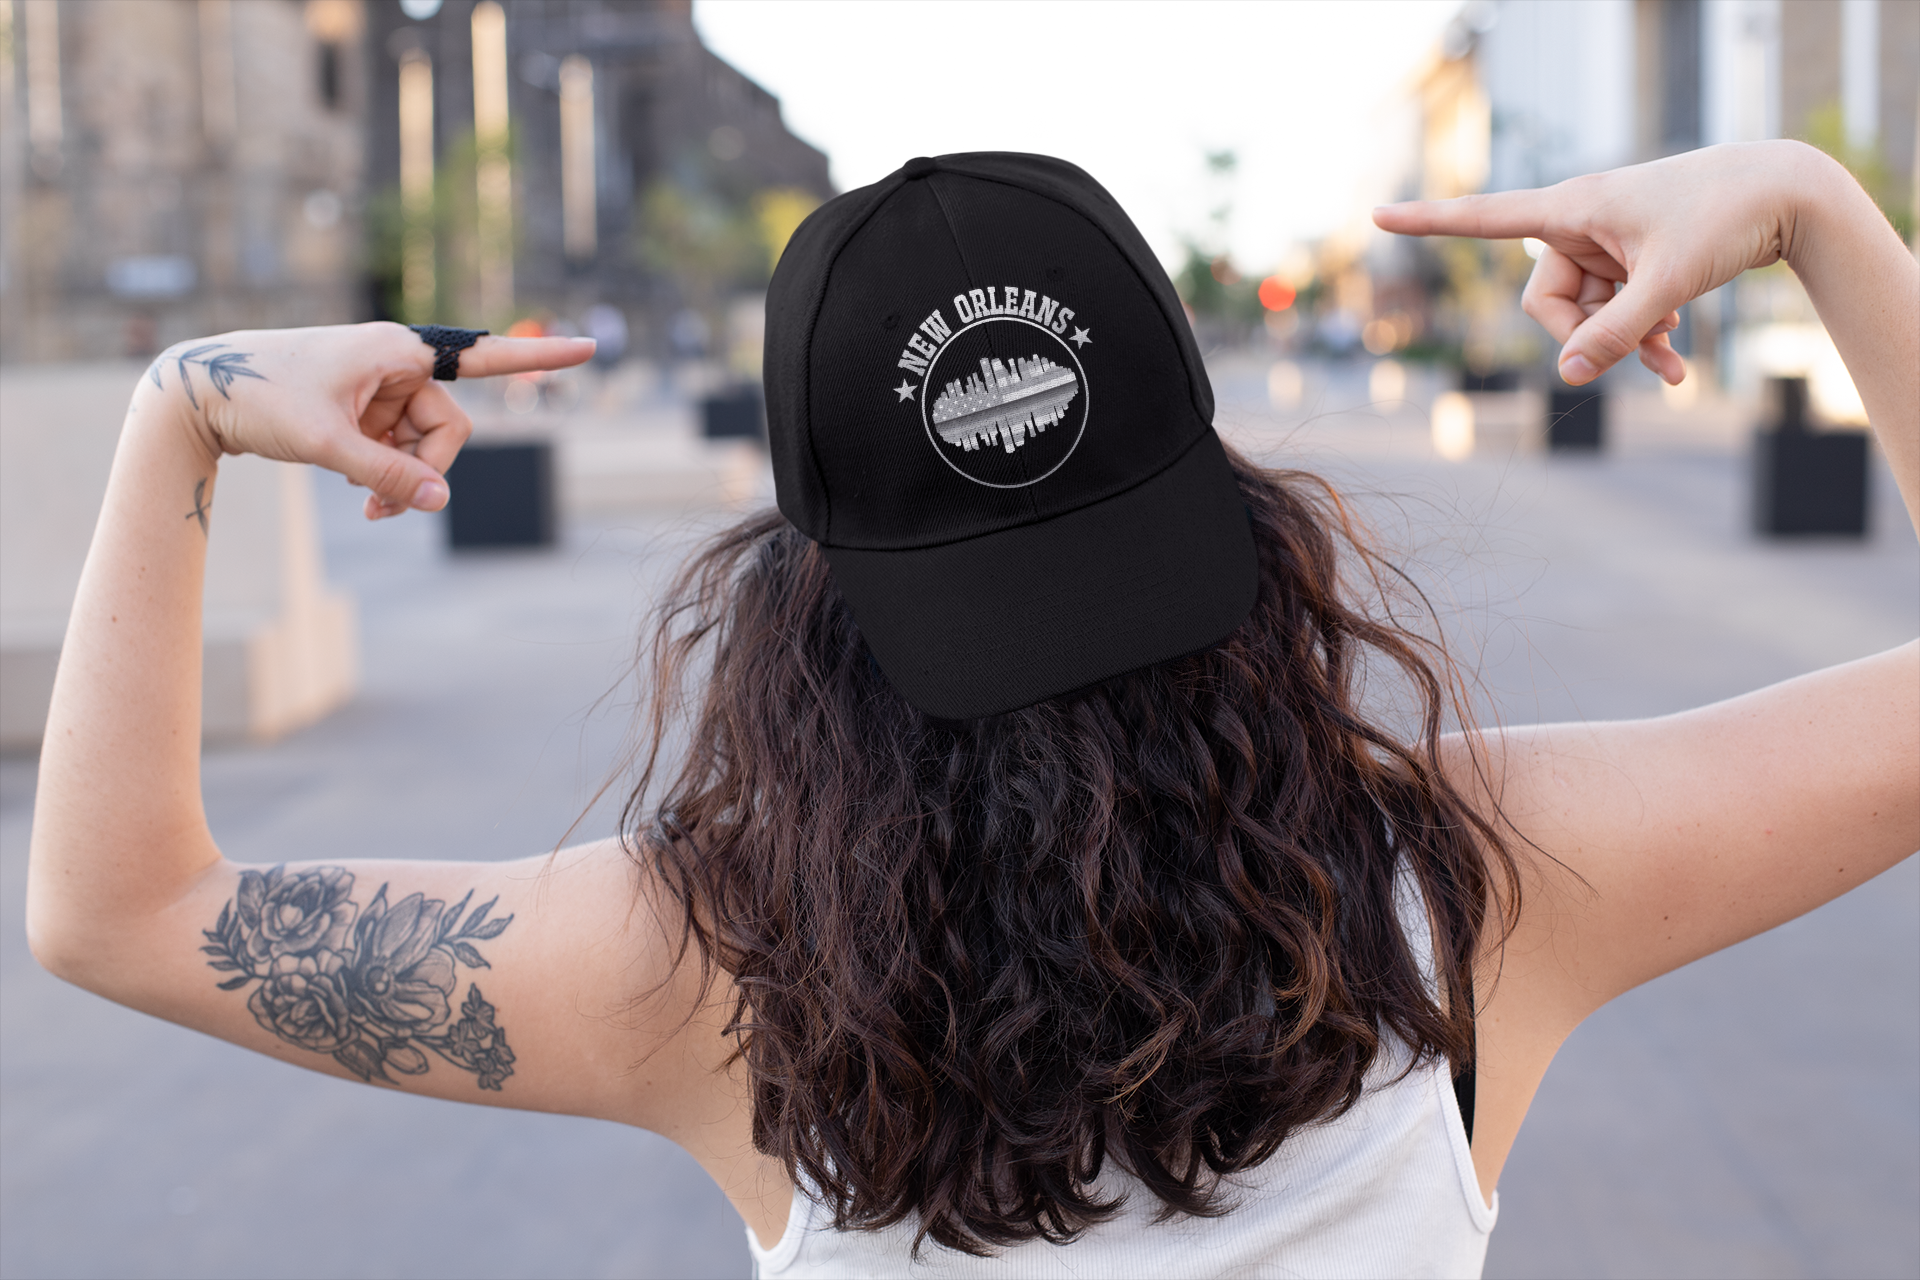 Unisex Twill Hat Higher Quality Materials(new orleans)